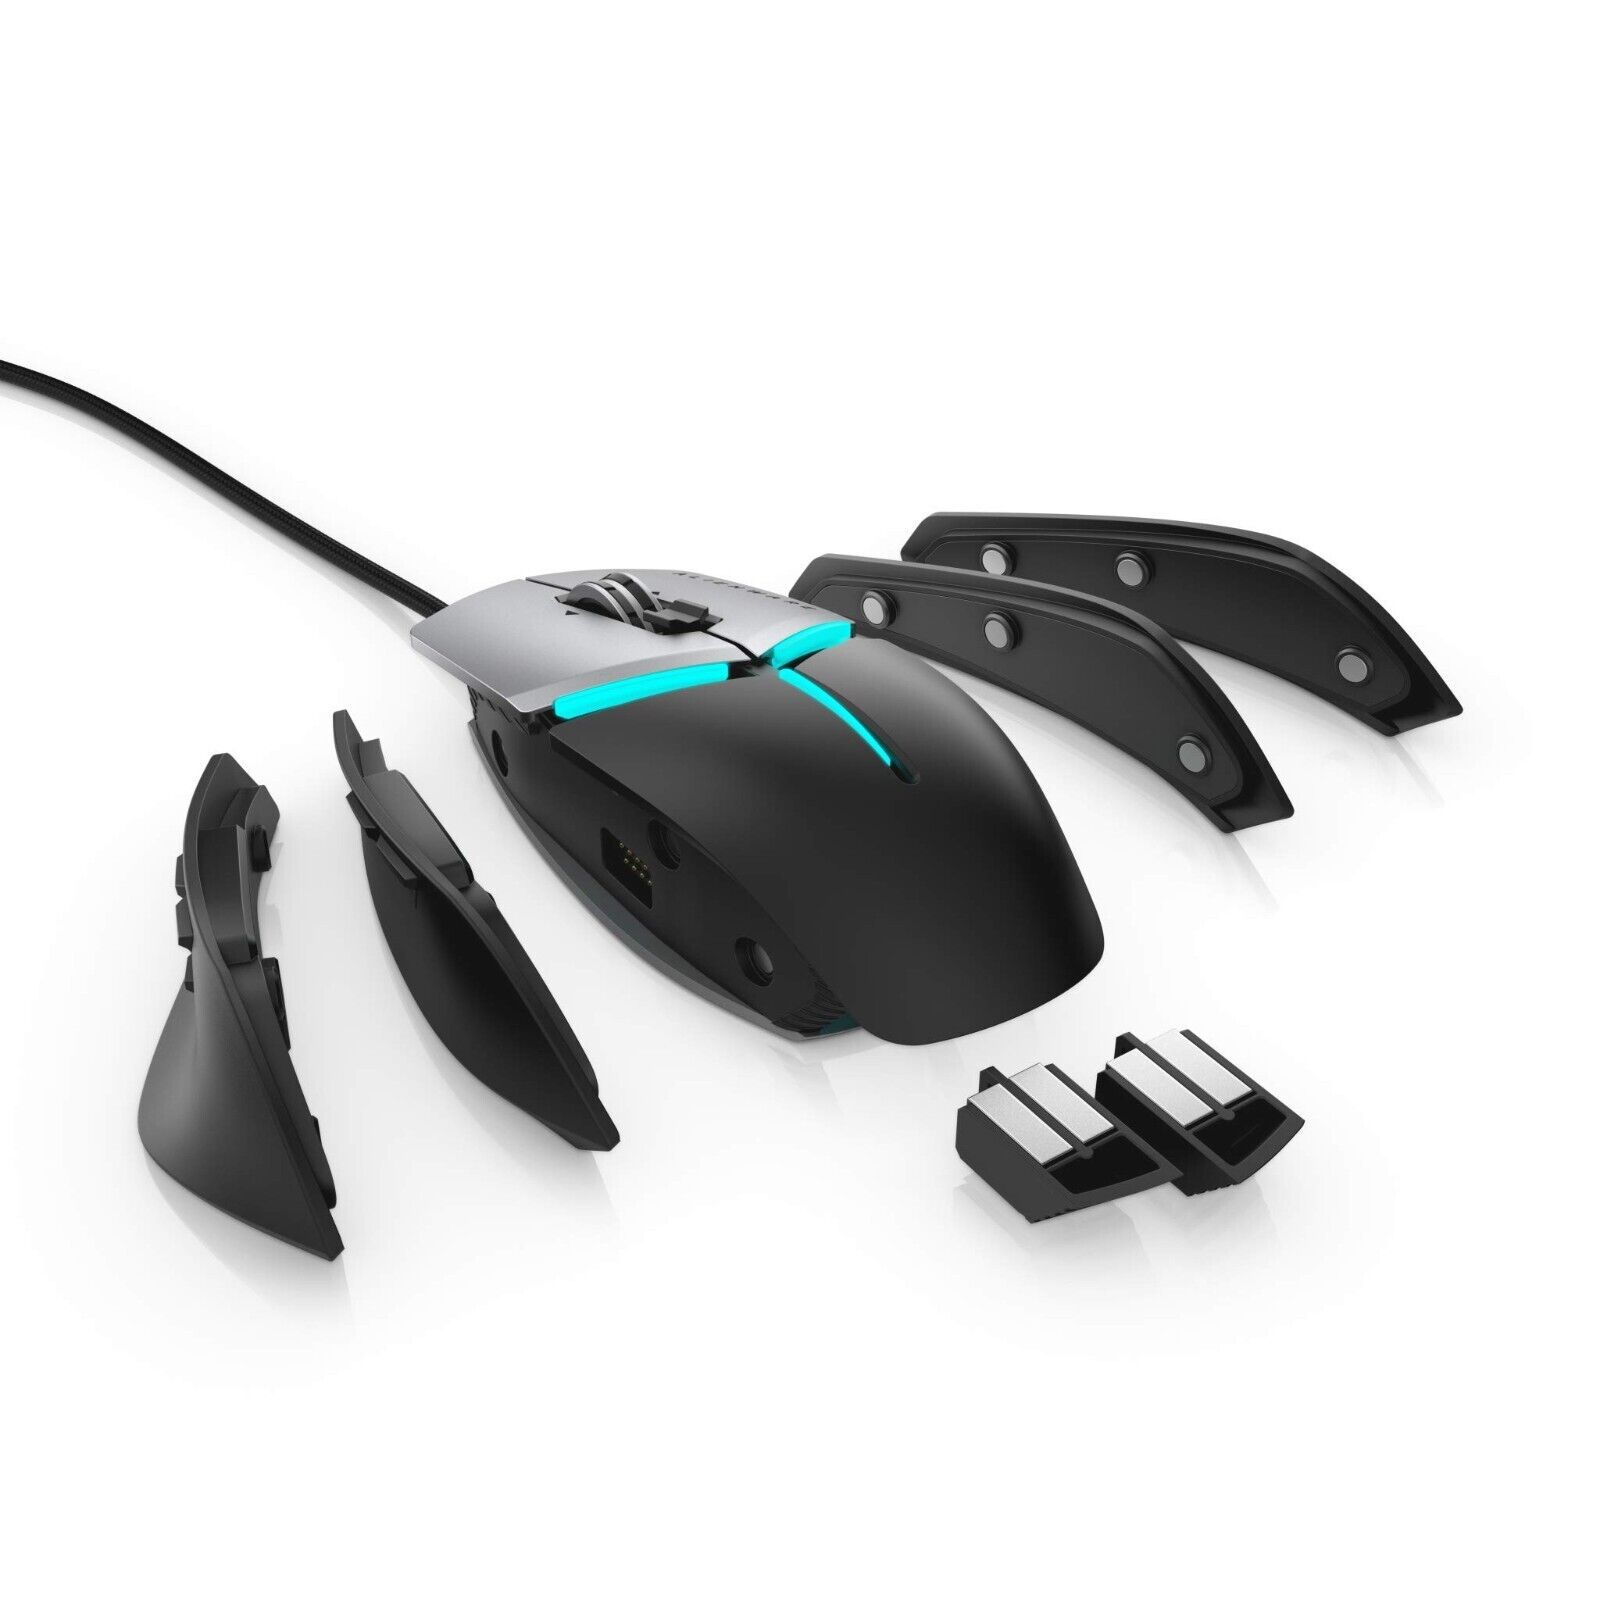 BRAND NEW Alienware Gaming Mouse with RGB Lighting AW959 Wired Optical